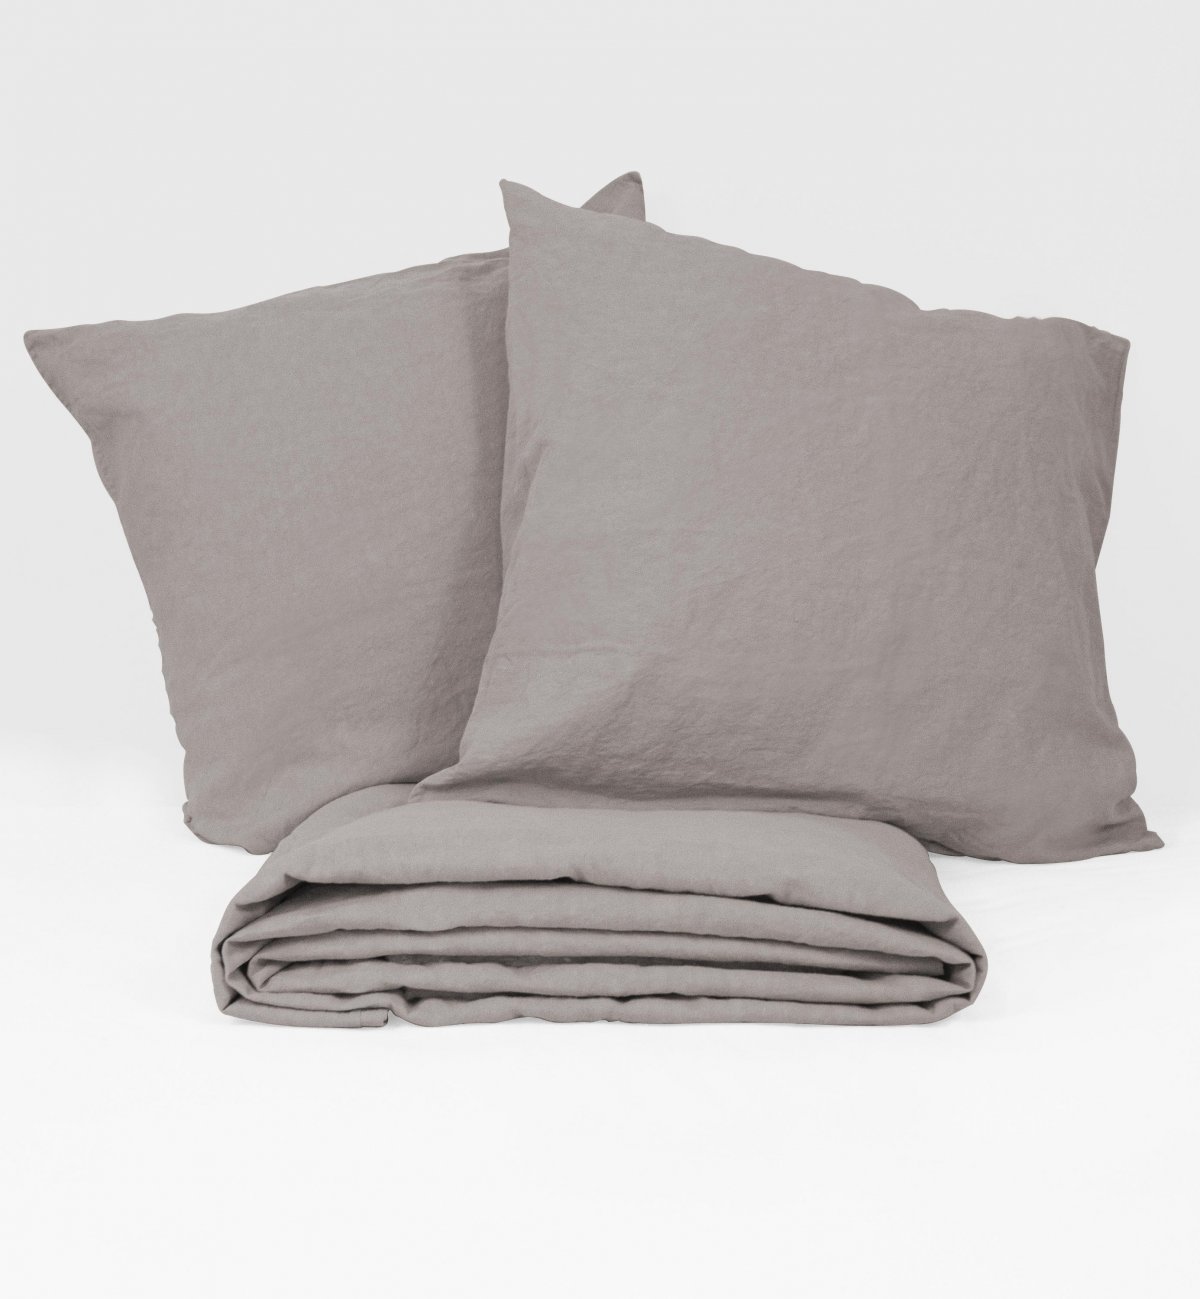 Adult duvet cover in Organic Cotton and linen + Kadolis pillowcases